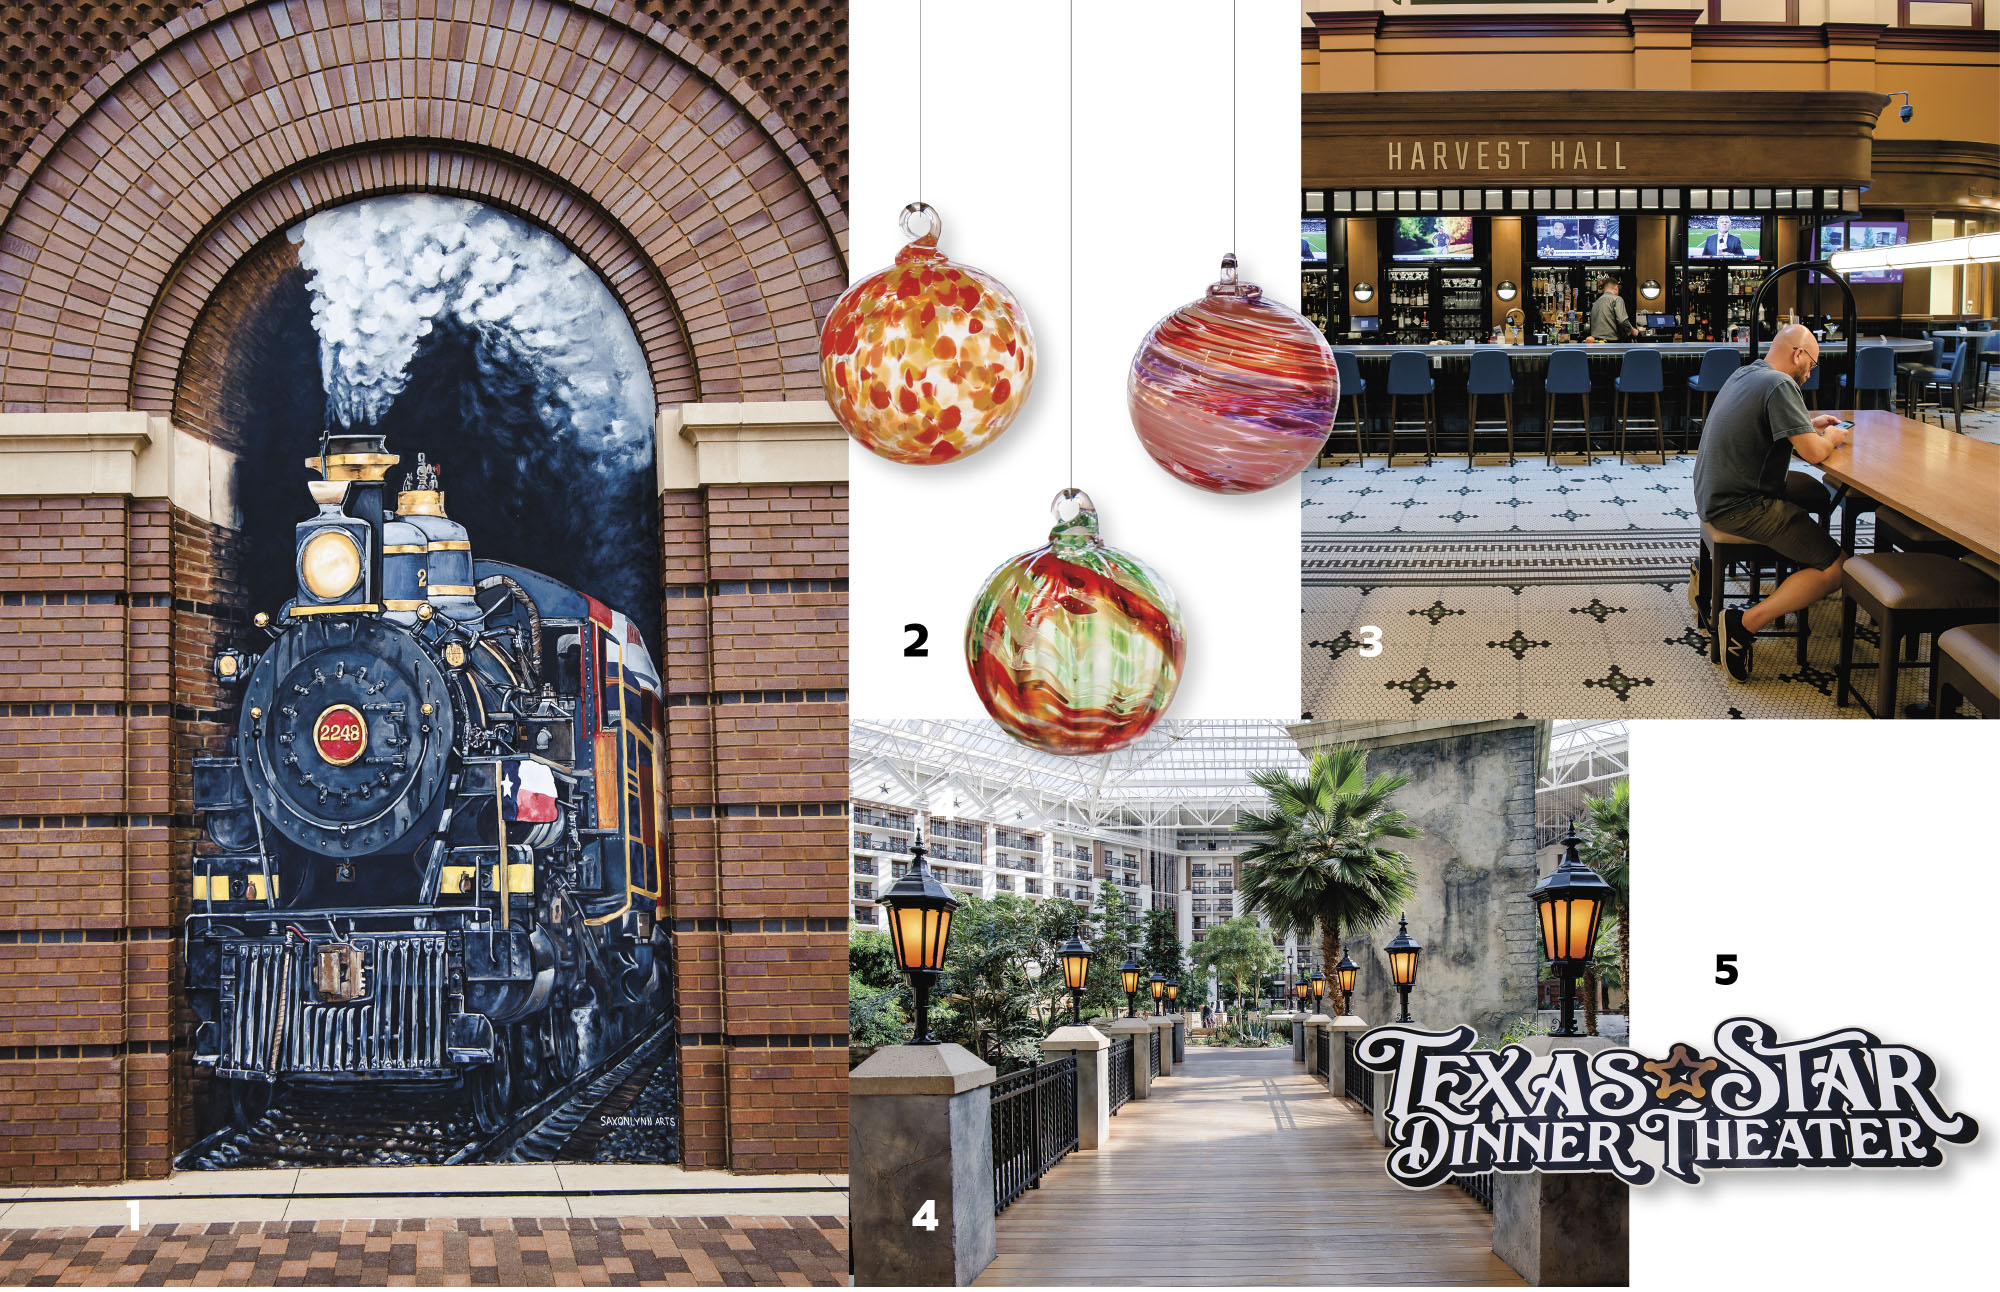 A collage of places and things to do in Grapevine, including a steam locomotive parked in a brick archway, glass ornaments, a downtown scene and a sticker reading "Texas Star Dinner Theater"